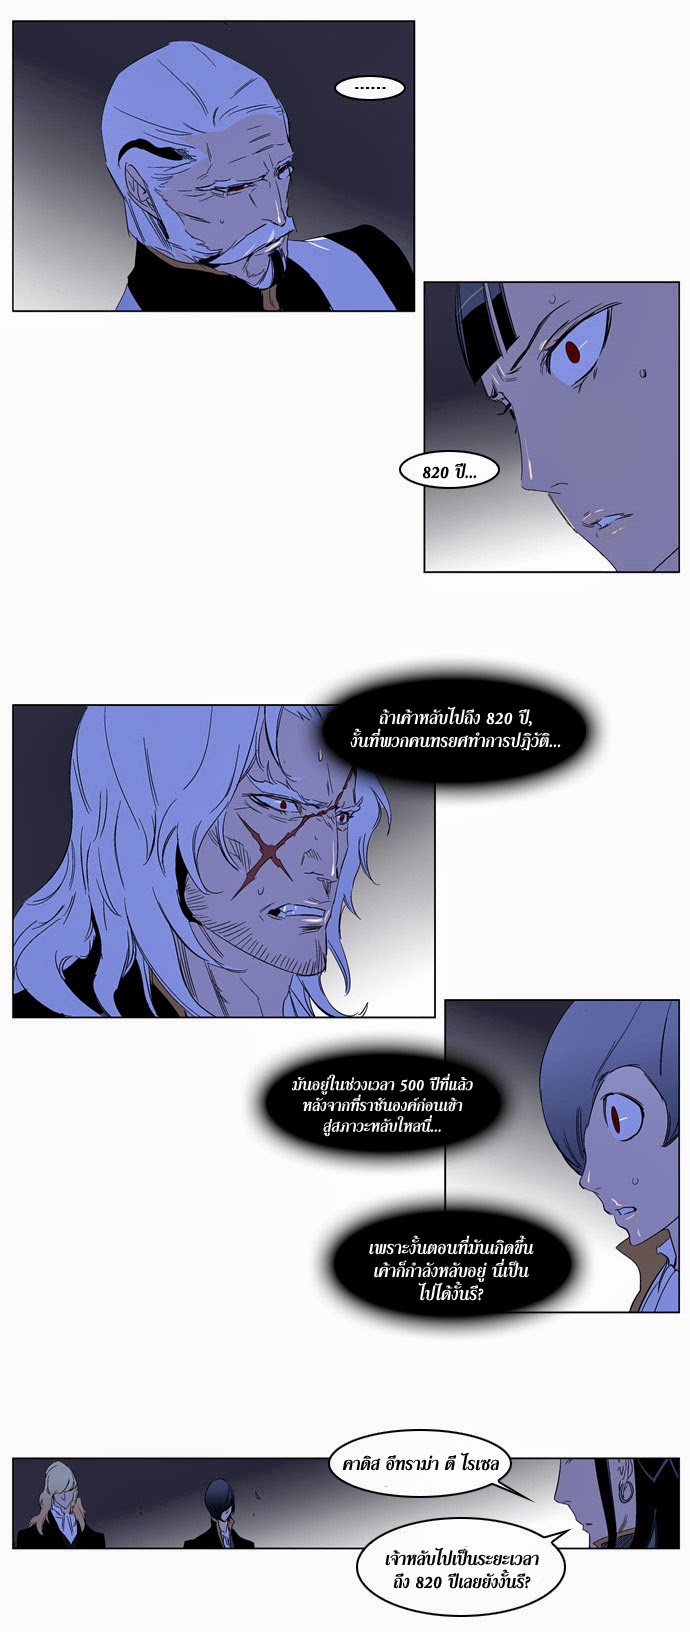 Noblesse 195 018